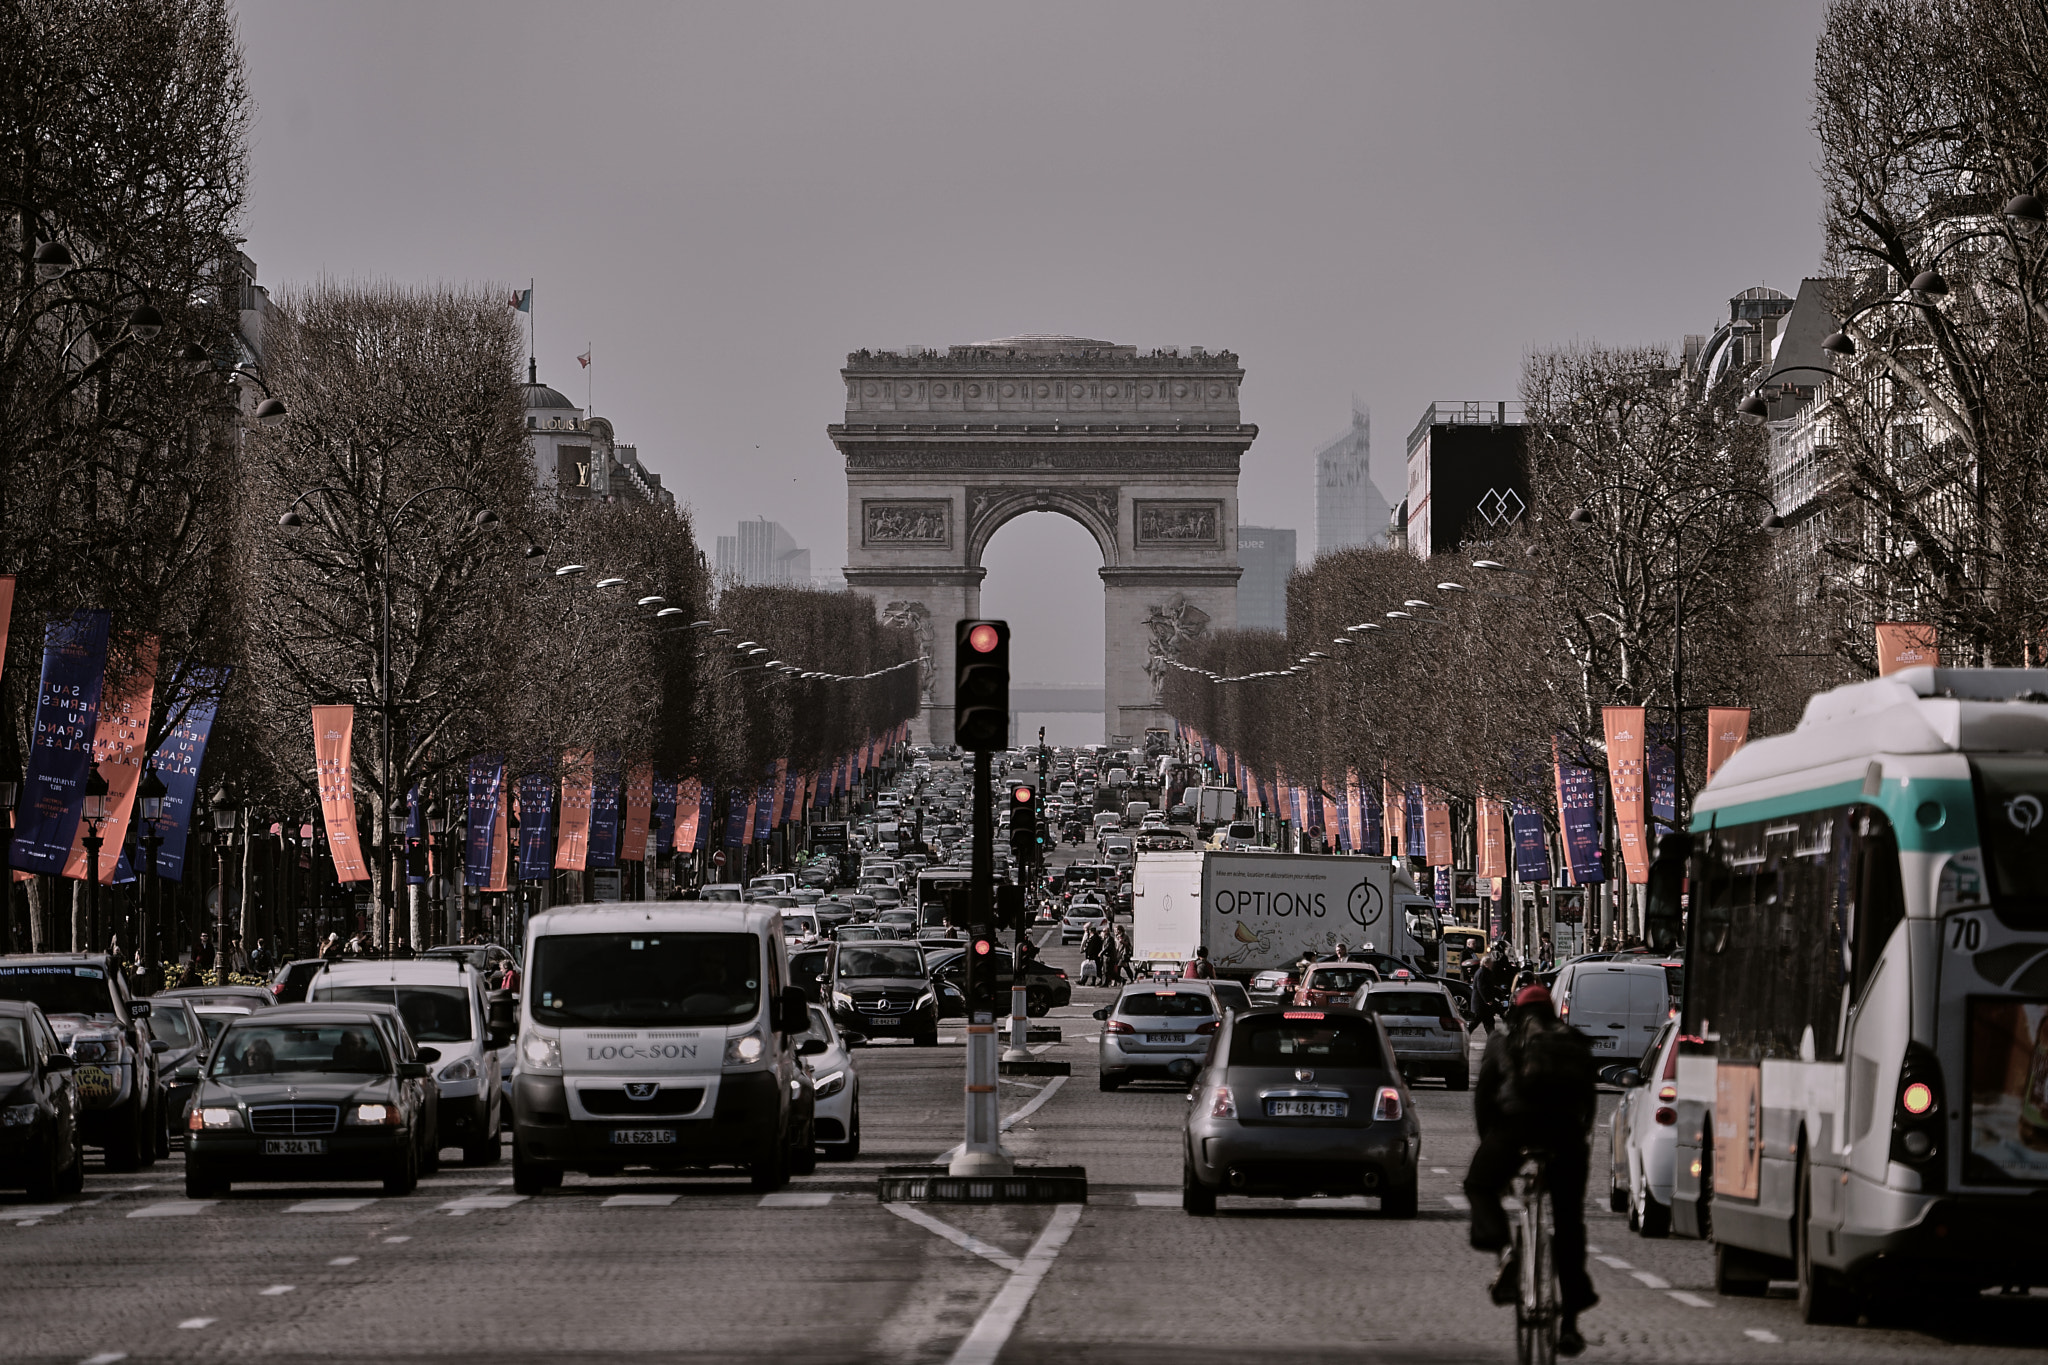 Sony a7 II sample photo. Champs-elysees and arc de triomphe photography